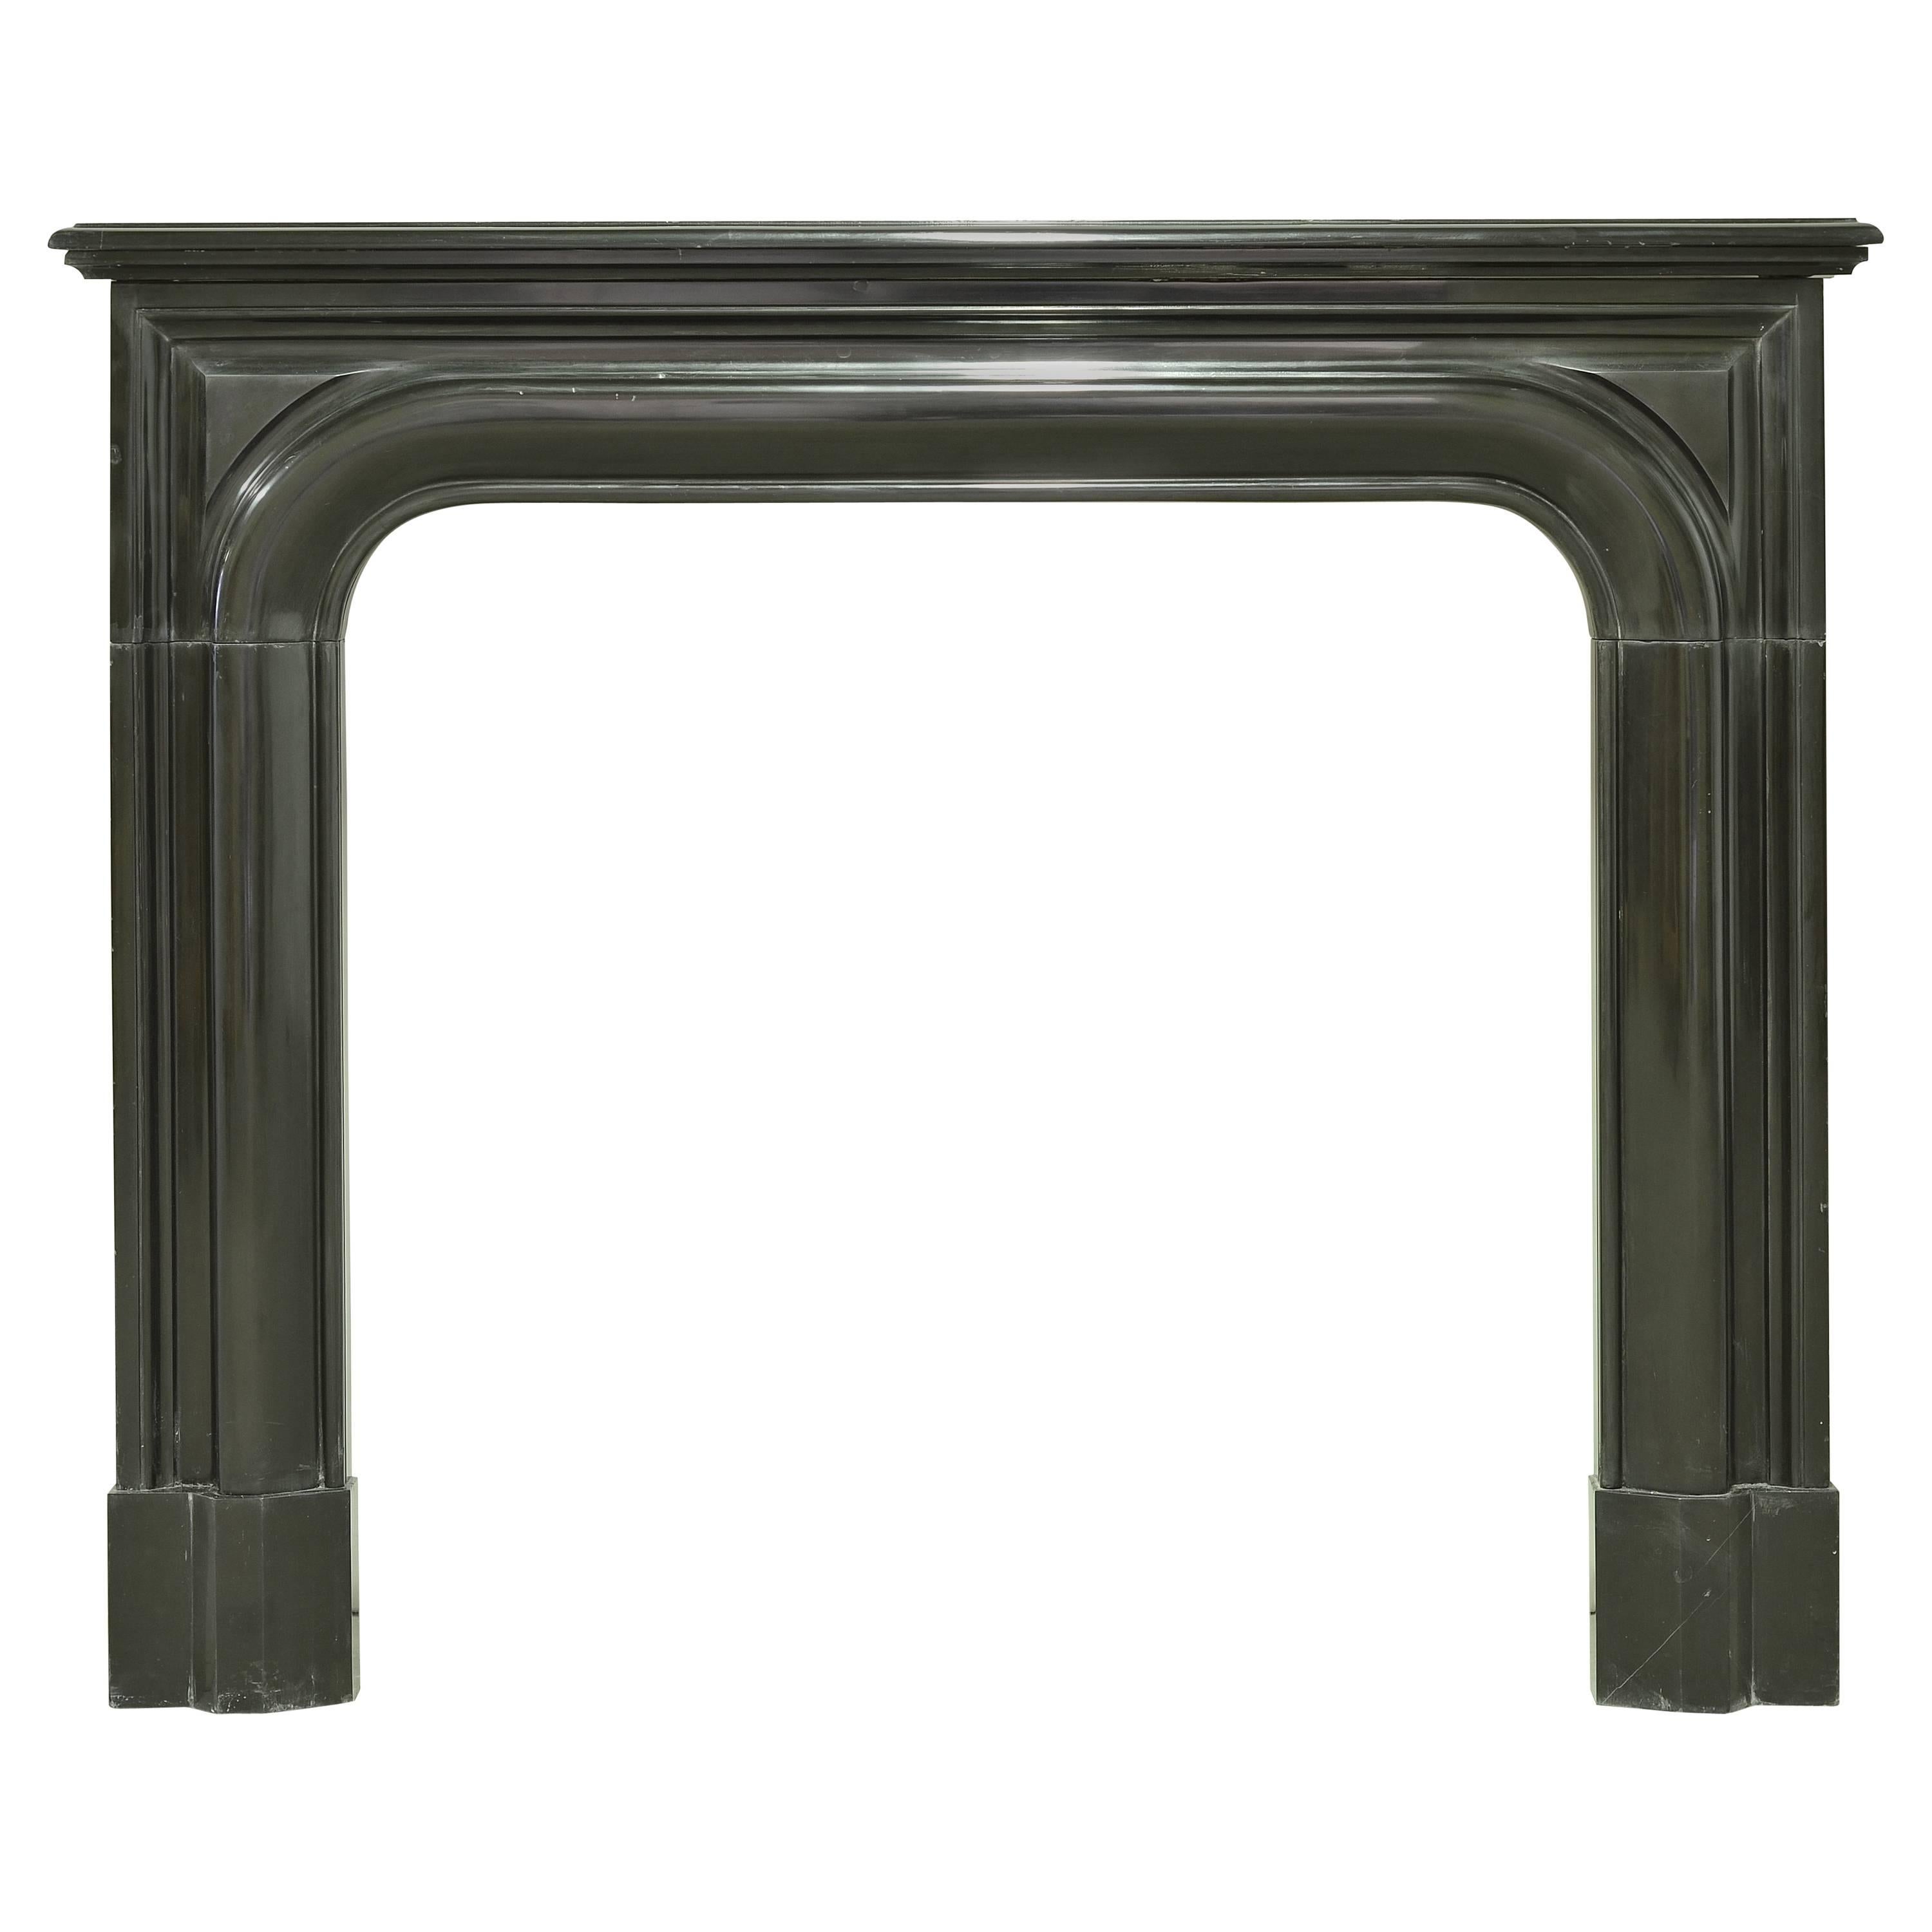 Small Antique French Louis XIV Fireplace in Black Marble